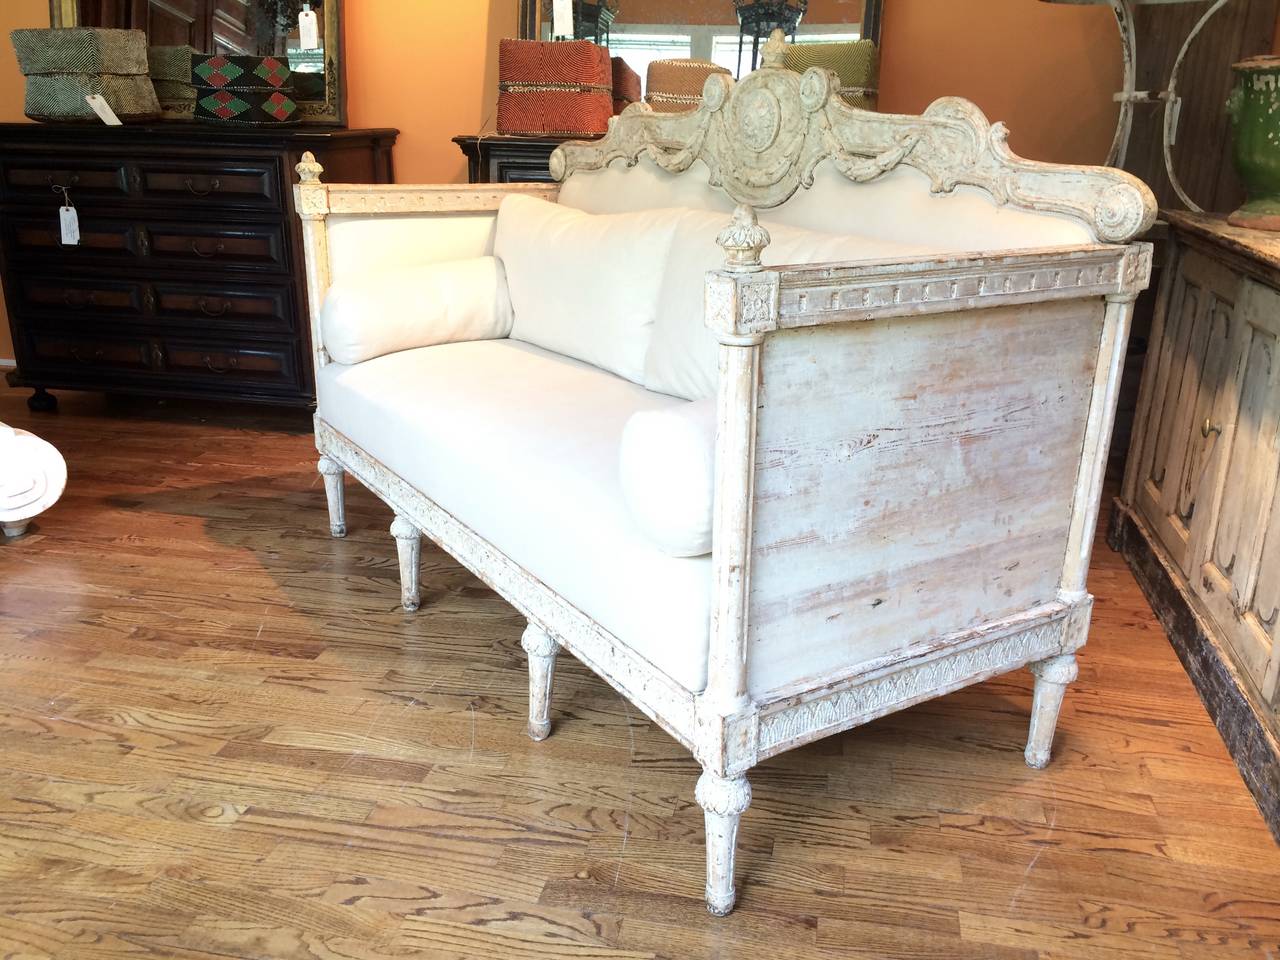 Most unusual Swedish Gustavian sofa. Made to commemorate the second centenial of the founding of the Engelsberg Ironworks in Vastmanland. Owned at that time by the Timm family.